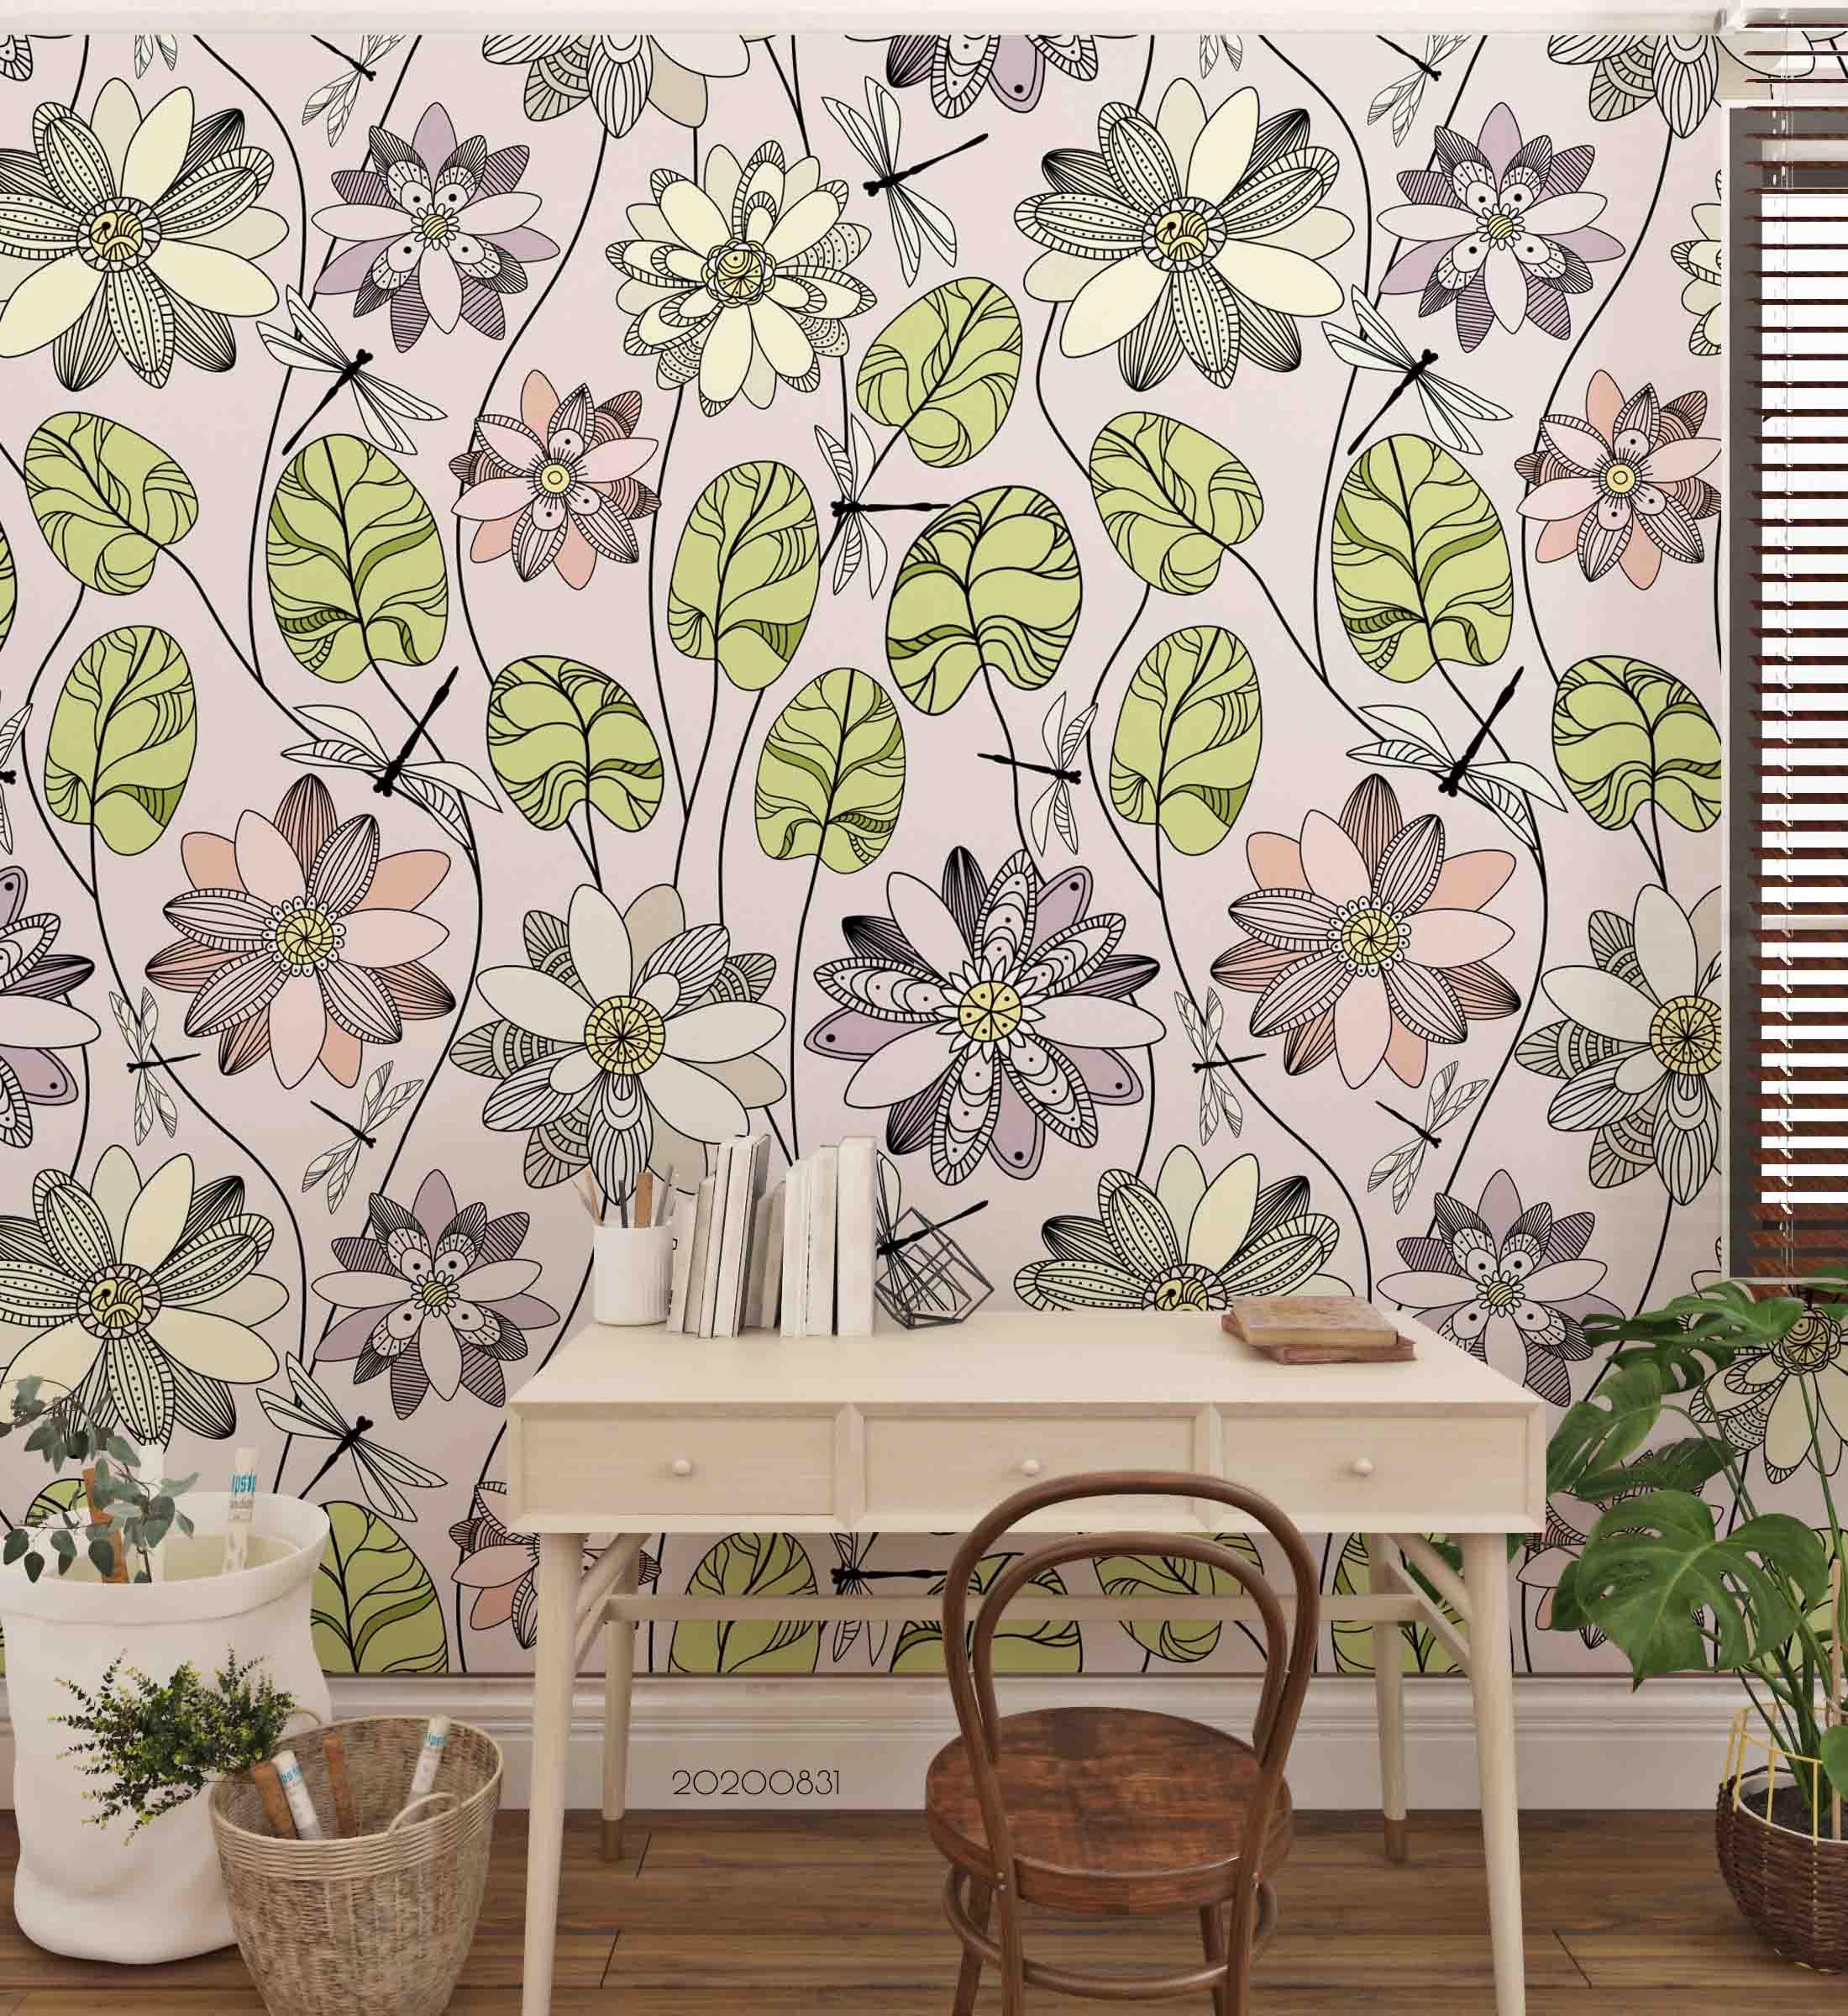 3D Hand Sketching Floral Leaves Plant Wall Mural Wallpaper LXL 1483- Jess Art Decoration